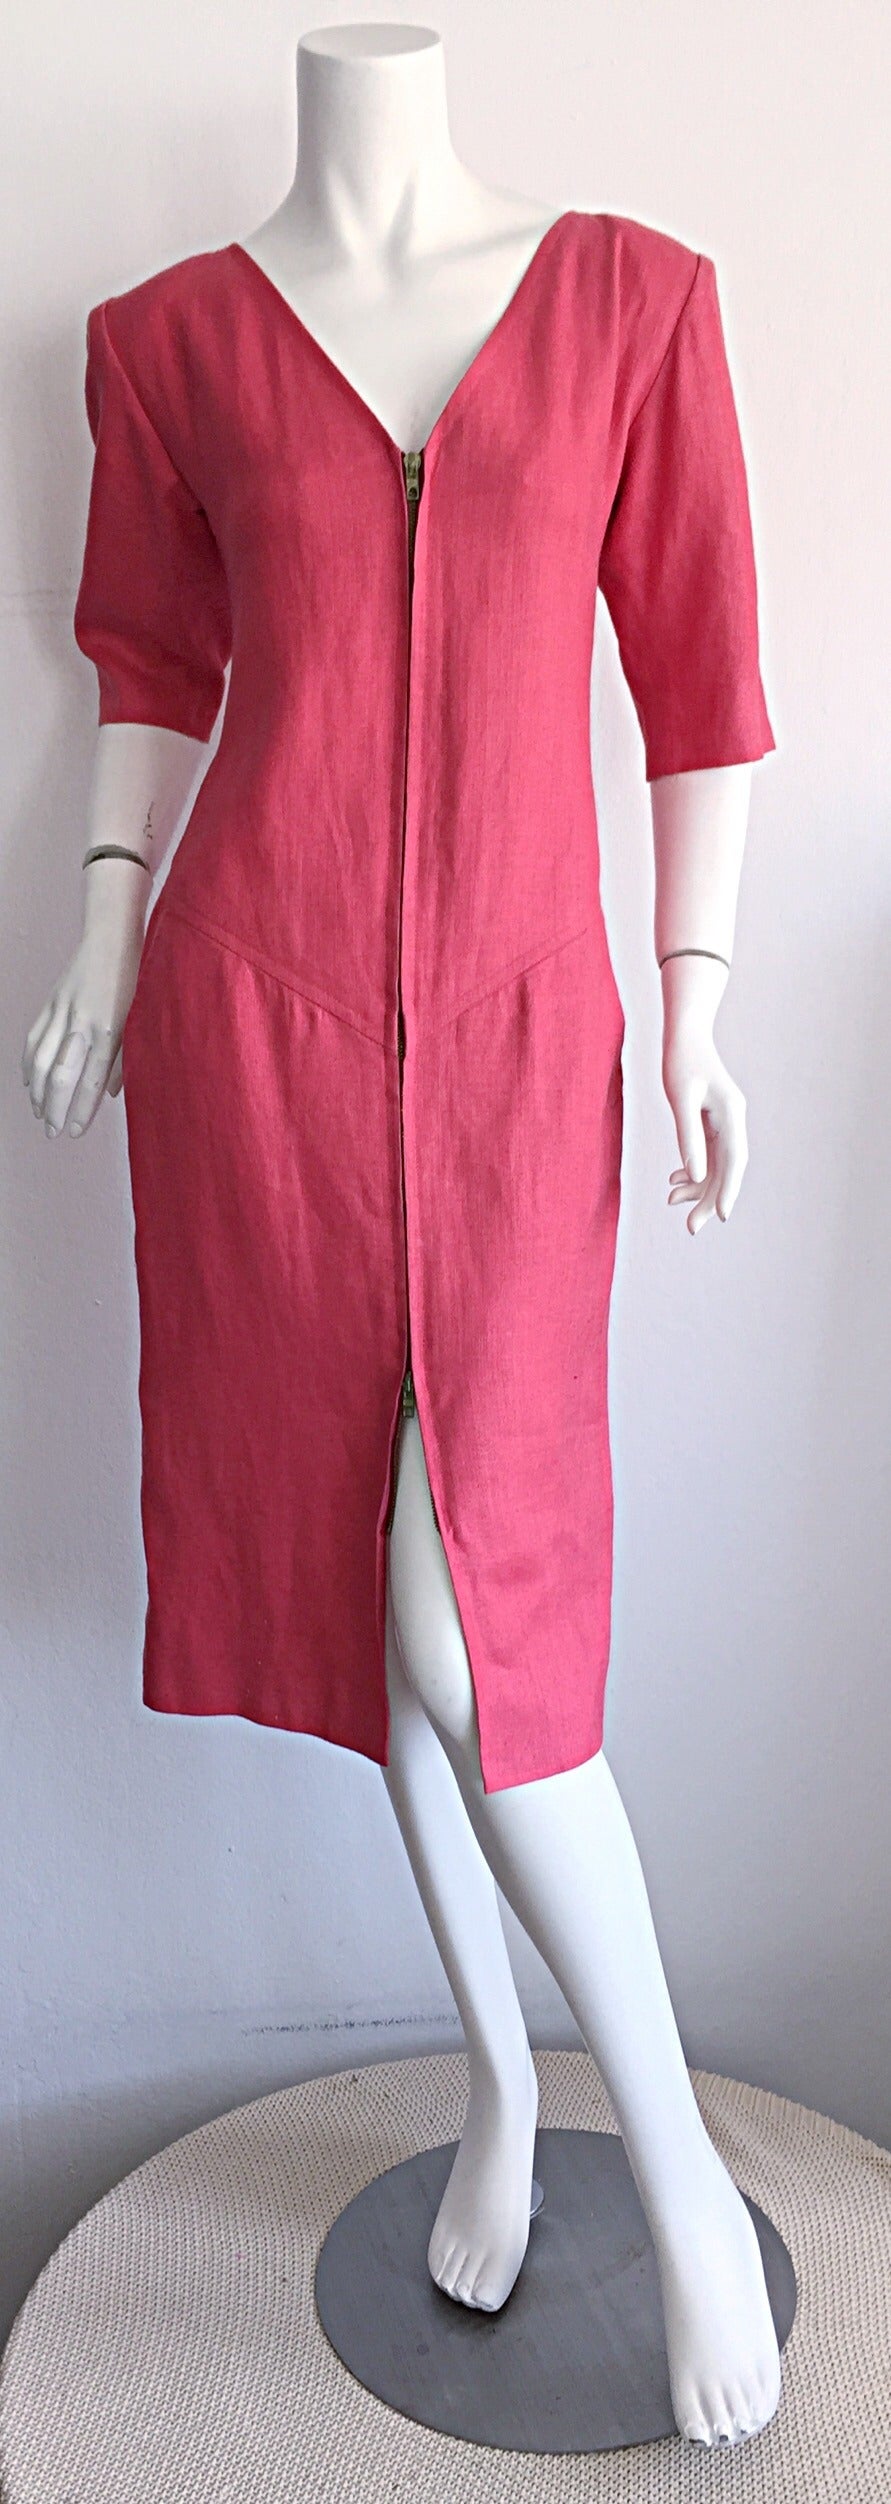 Beautiful vintage YSL Yves Saint Laurent 'Rive Gauche' raspberry pink linen tunic dress! Full metal zipper up the front, making this beauty extremely versatile! Flattering corset seams at waist, make for an utterly flattering fit! Looks great worn